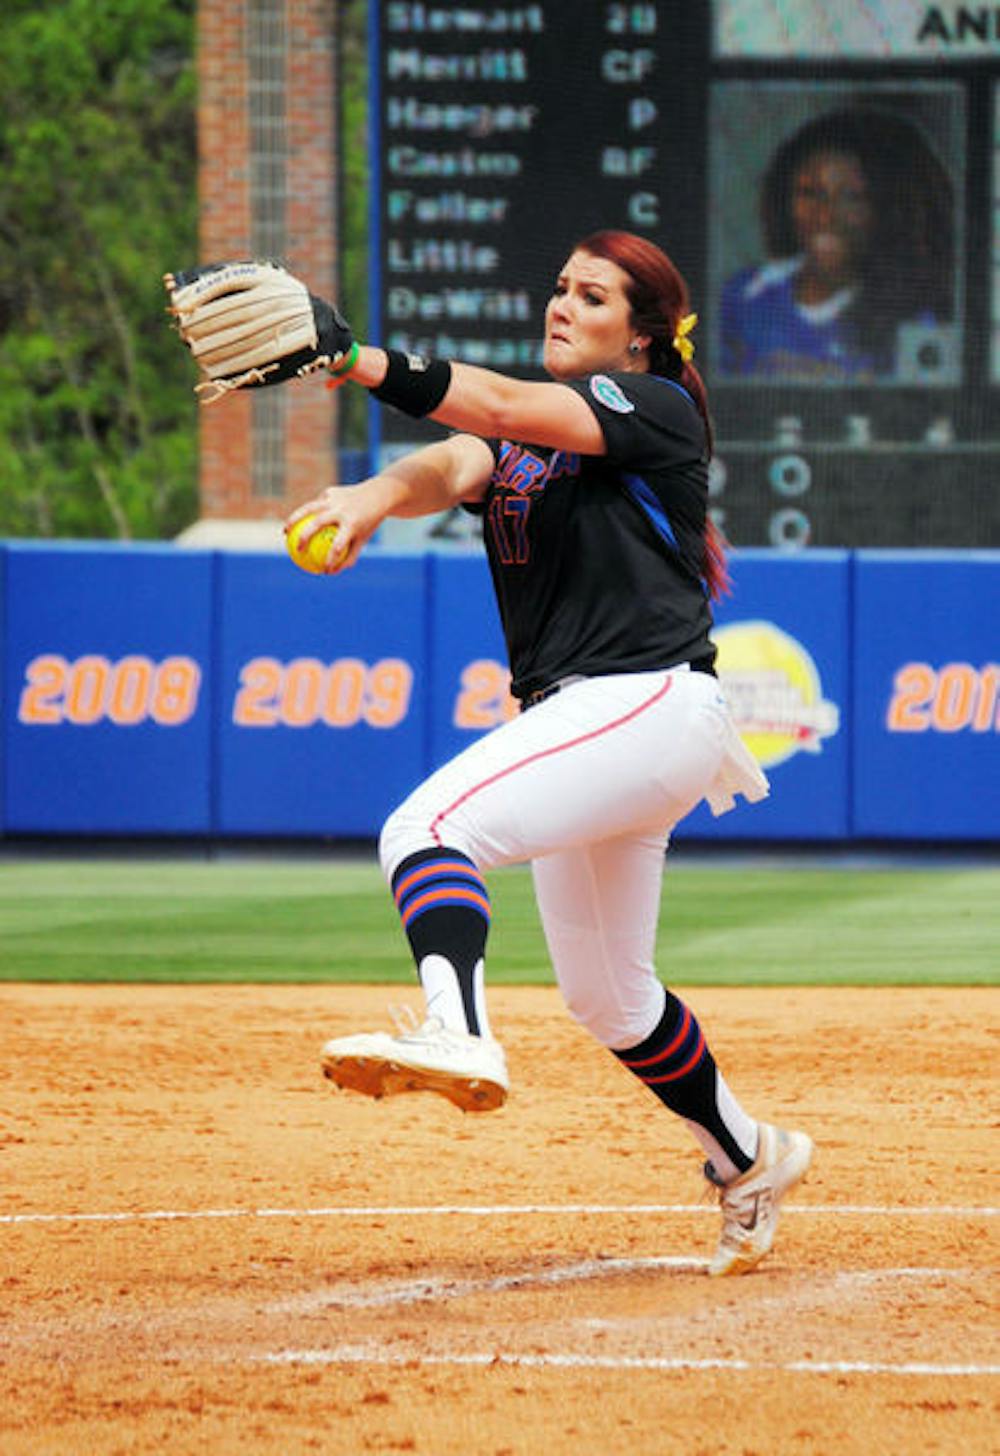 <p><span>Lauren Haeger pitches during Florida's 14-10 loss to LSU on Mar. 14 at Katie Seashole Pressly Stadium.</span></p>